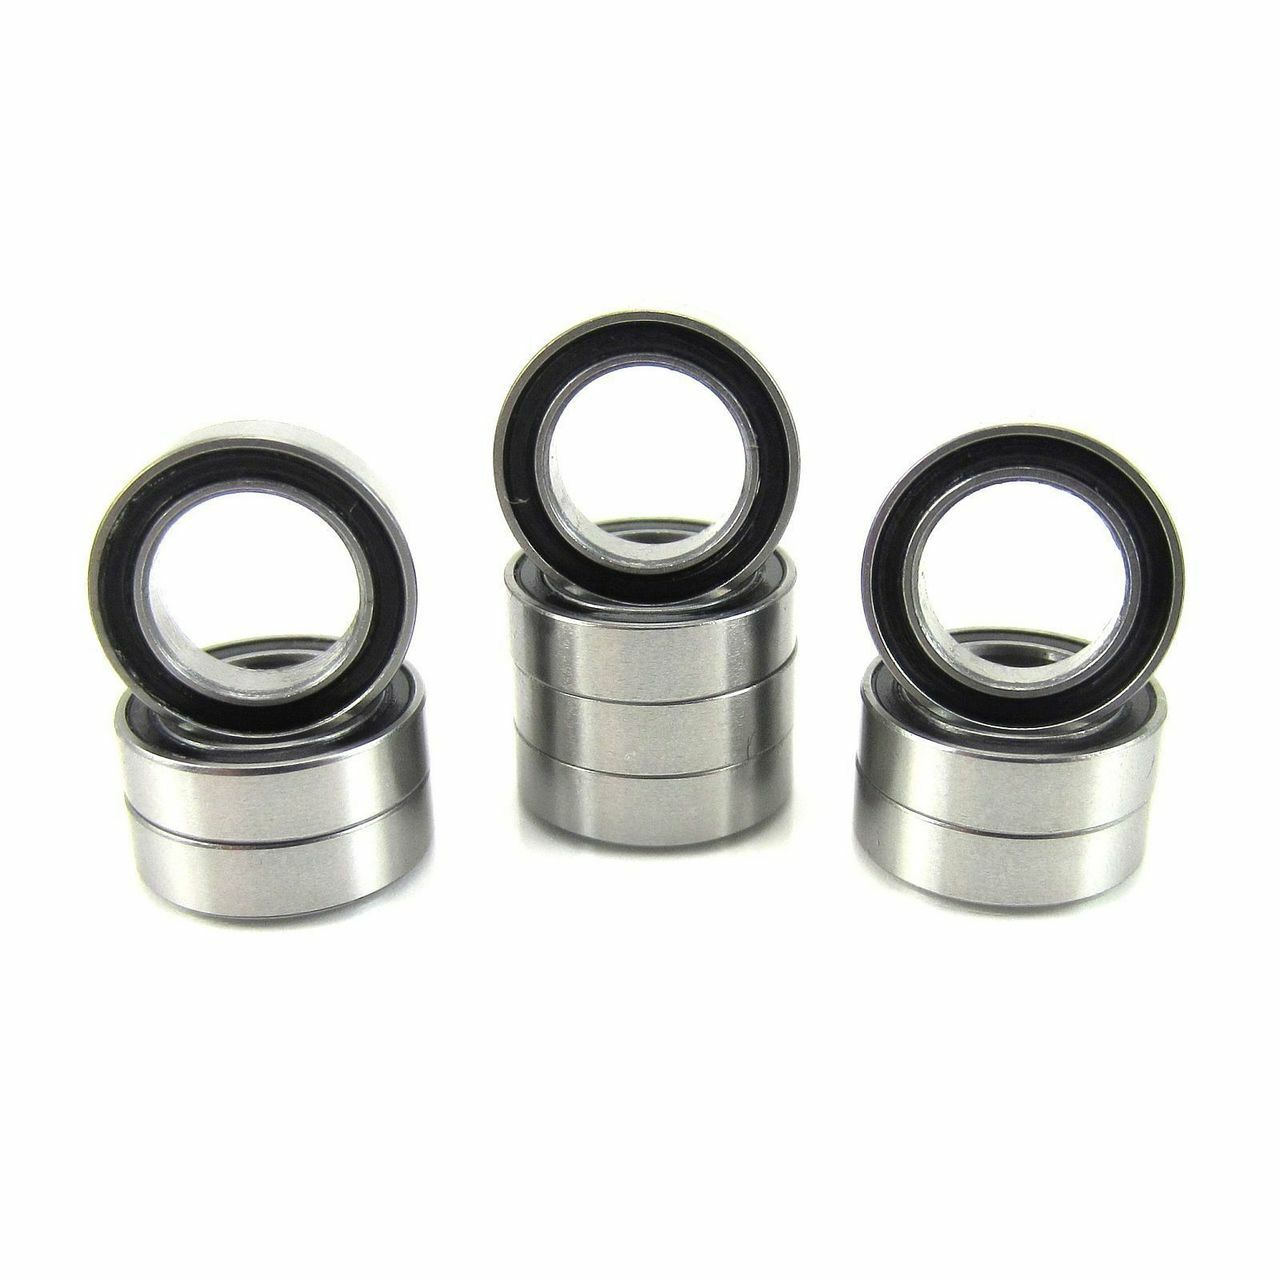 MR117-2RS 7x11x3mm Precision High Speed RC Car Ball Bearing, Chrome Steel (GCr15) with Black Rubber Seals ABEC-1 ABEC-3 ABEC-5